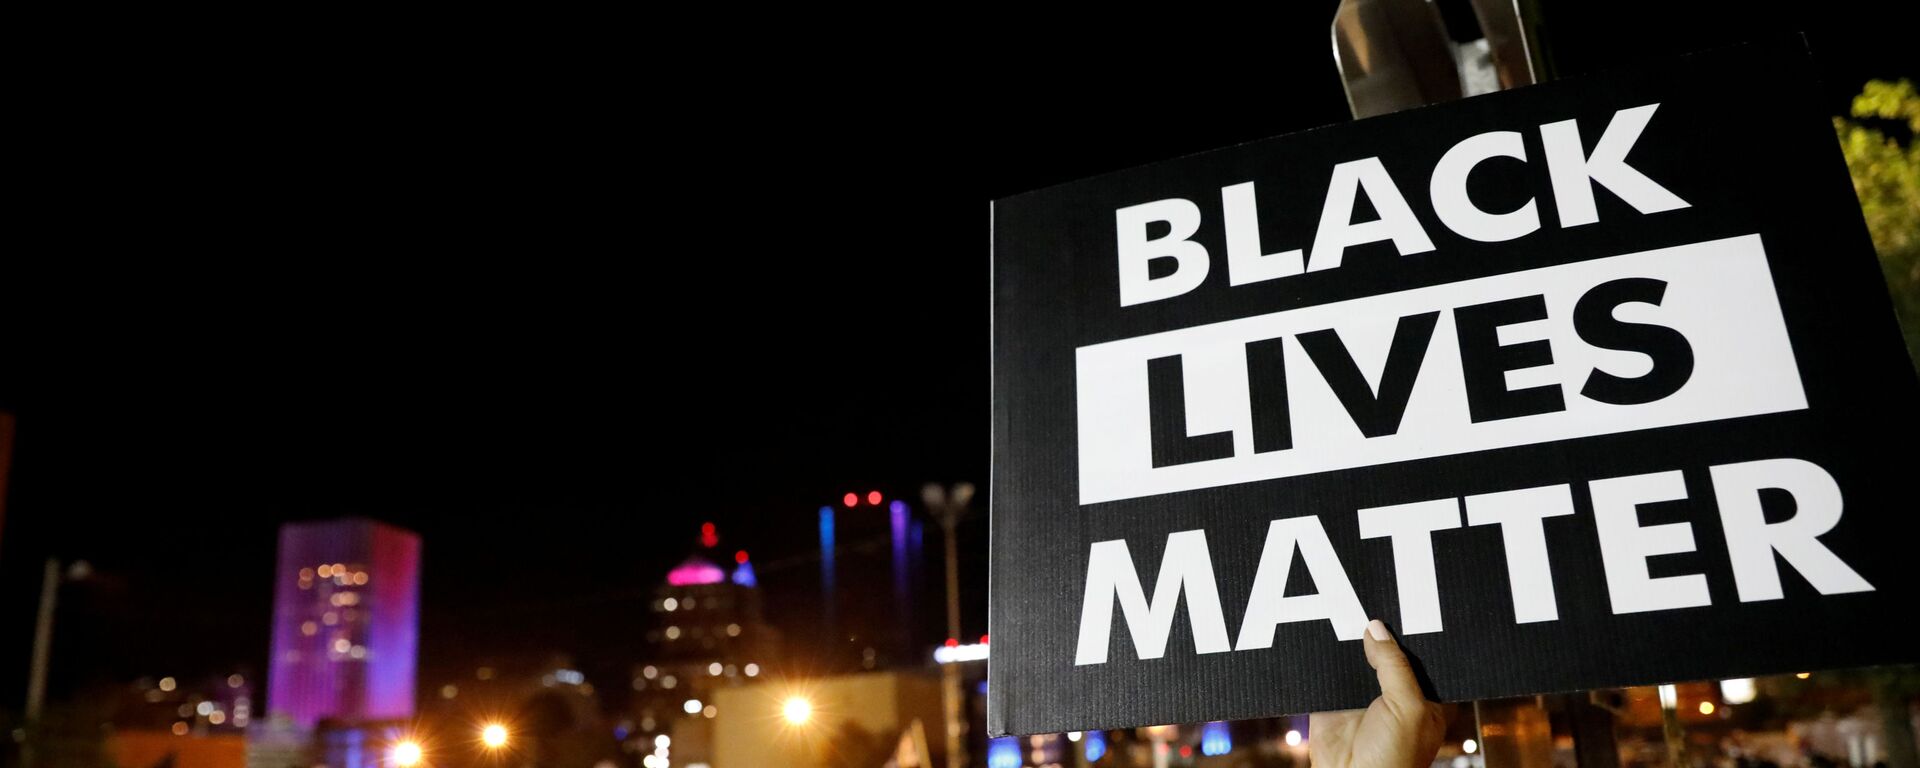 A demonstrator holds up a Black Lives Matter sign during a protest over the death of Daniel Prude after police put a spit hood over his head during an arrest on 23 March, in Rochester, New York, 6 September 2020 - Sputnik International, 1920, 23.12.2020